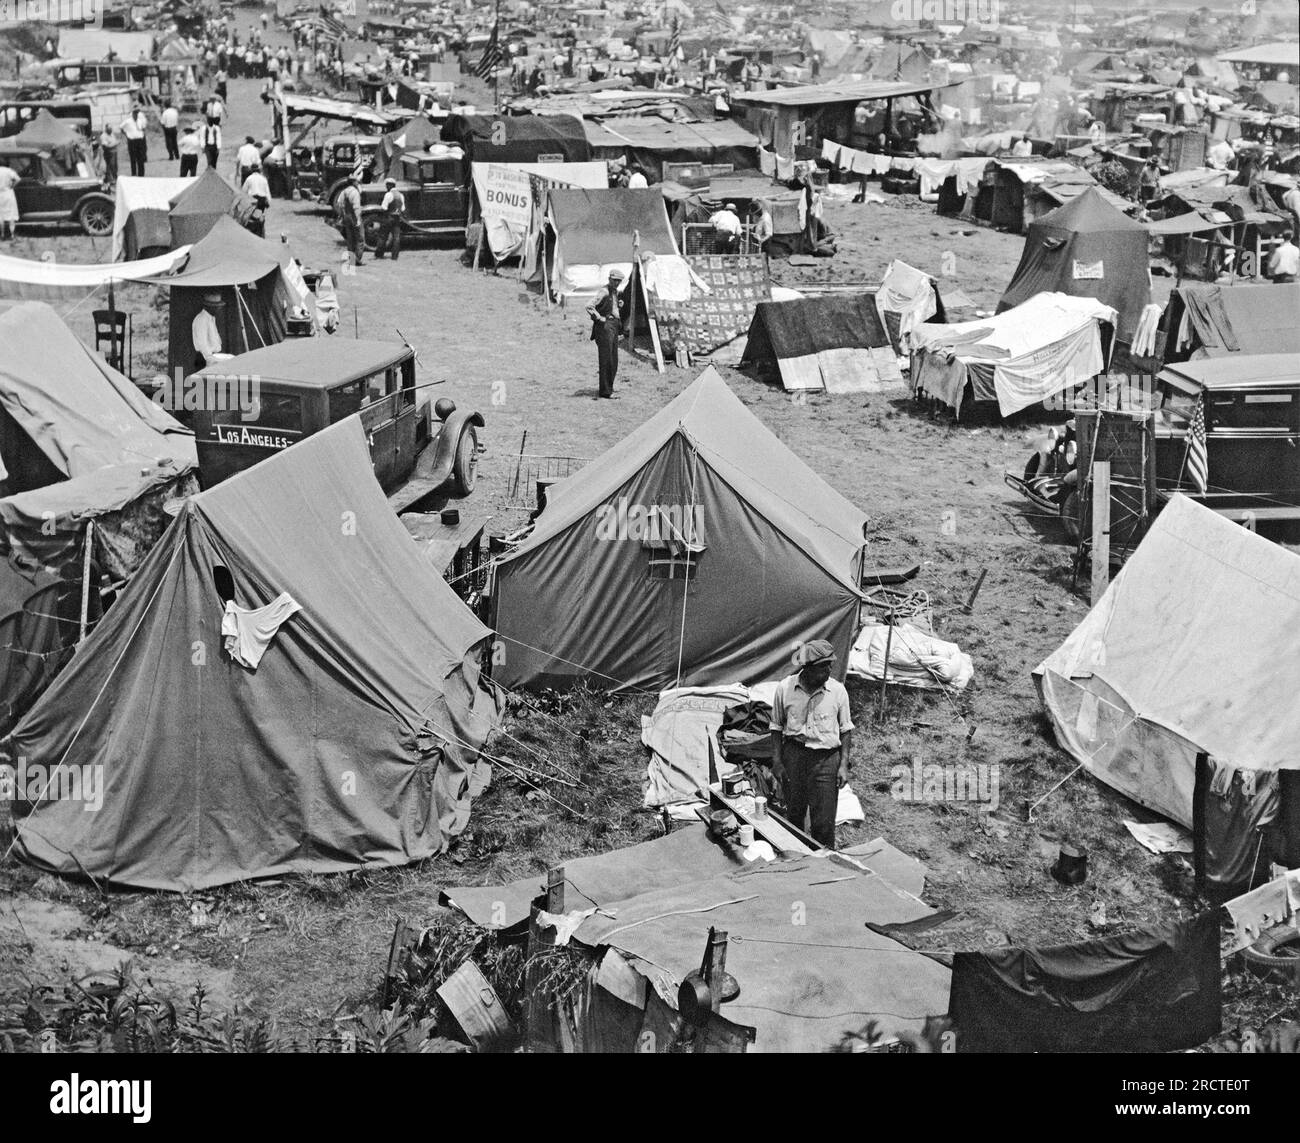 Washington, D.C.:   1932. Camp Marks, one of the encampments built by veterans of the Bonus Expeditionary Force in Washington, D.C. Stock Photo